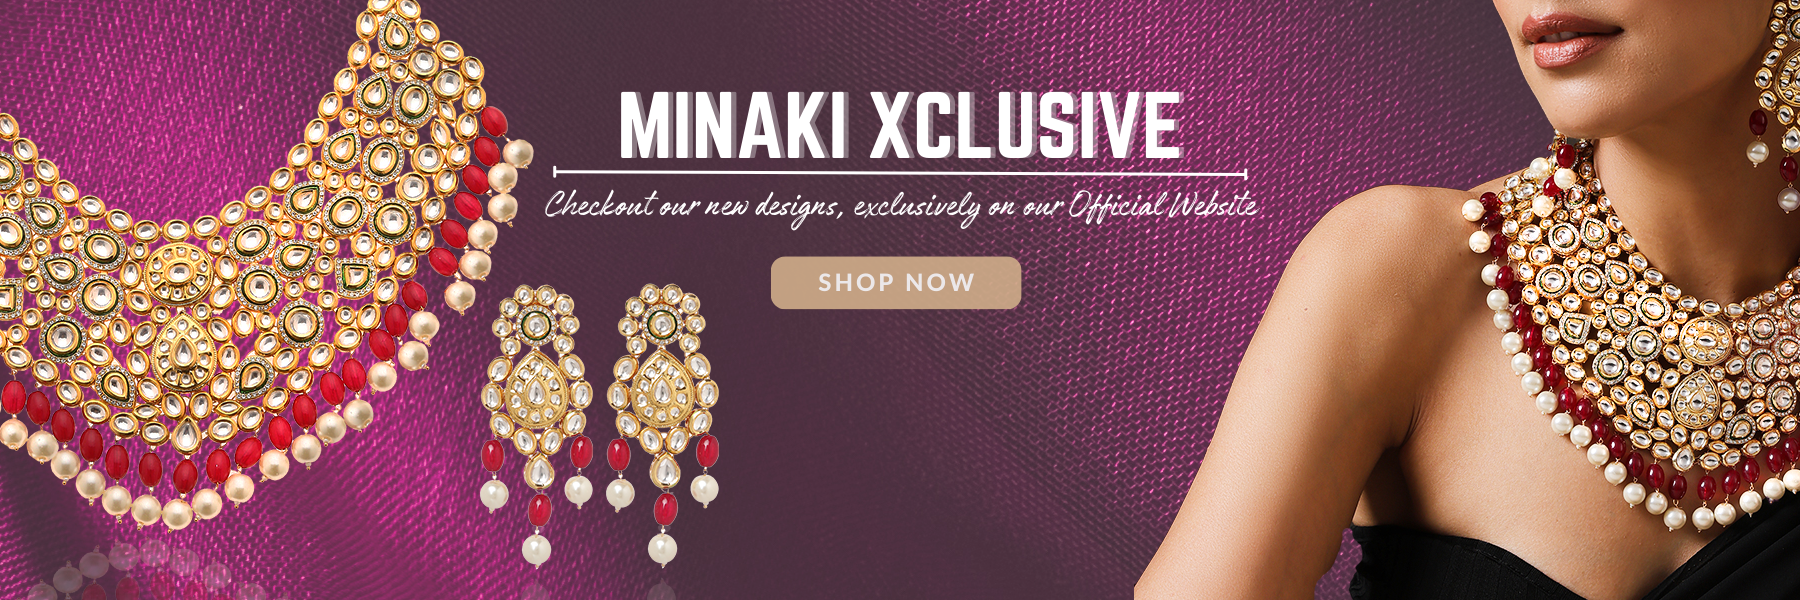 Minaki Jewellery - Checkout our new designs, exclusively on our Official Website